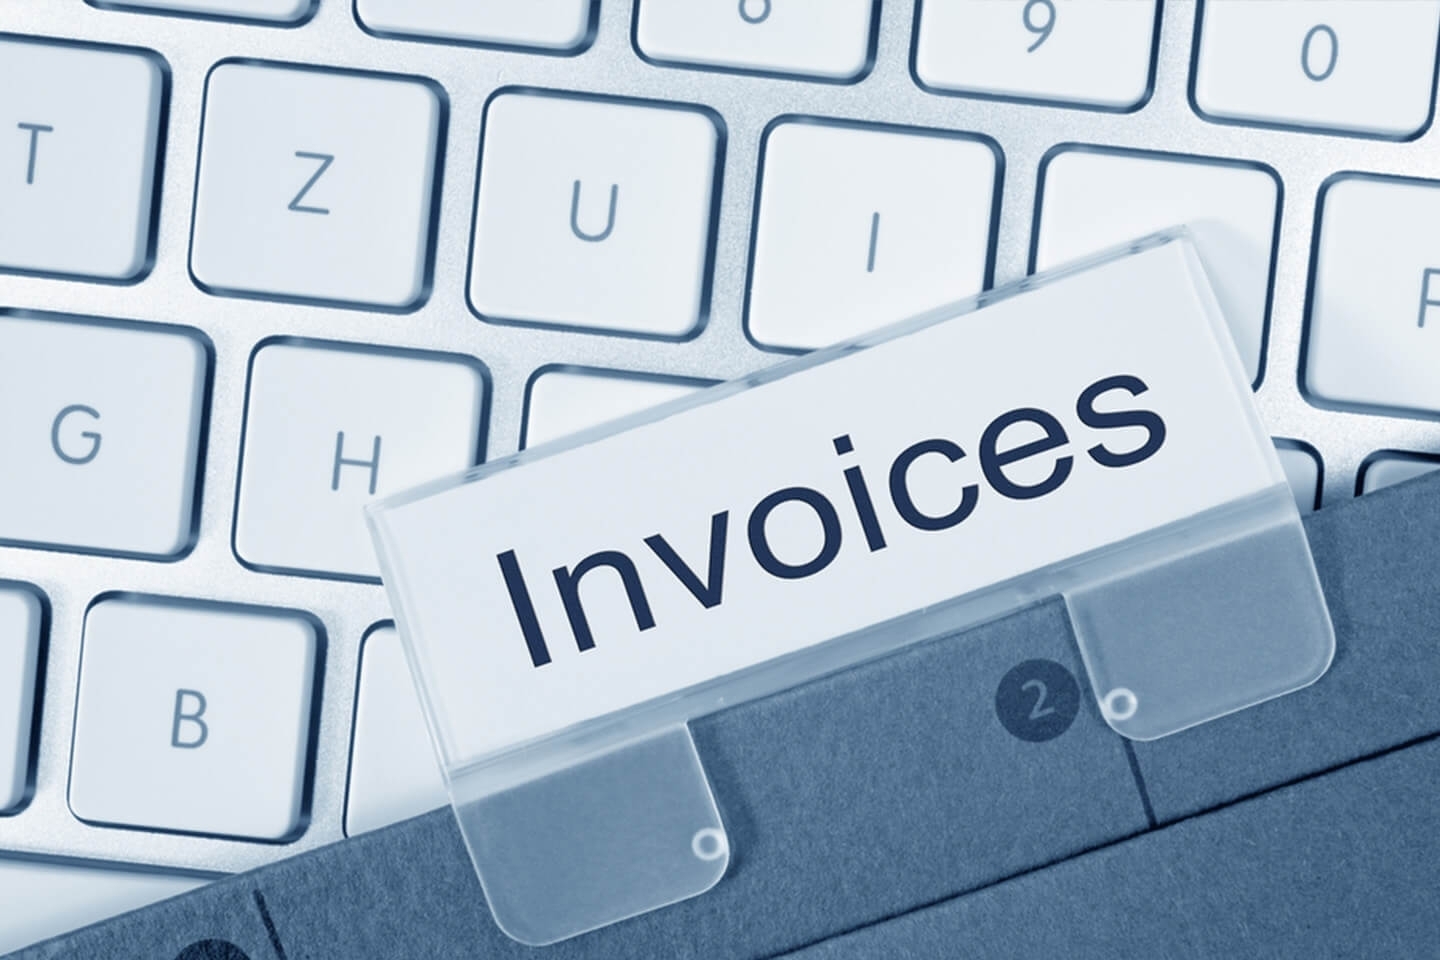 selective invoice discounting invoice template free 2016 invoice discounting explained